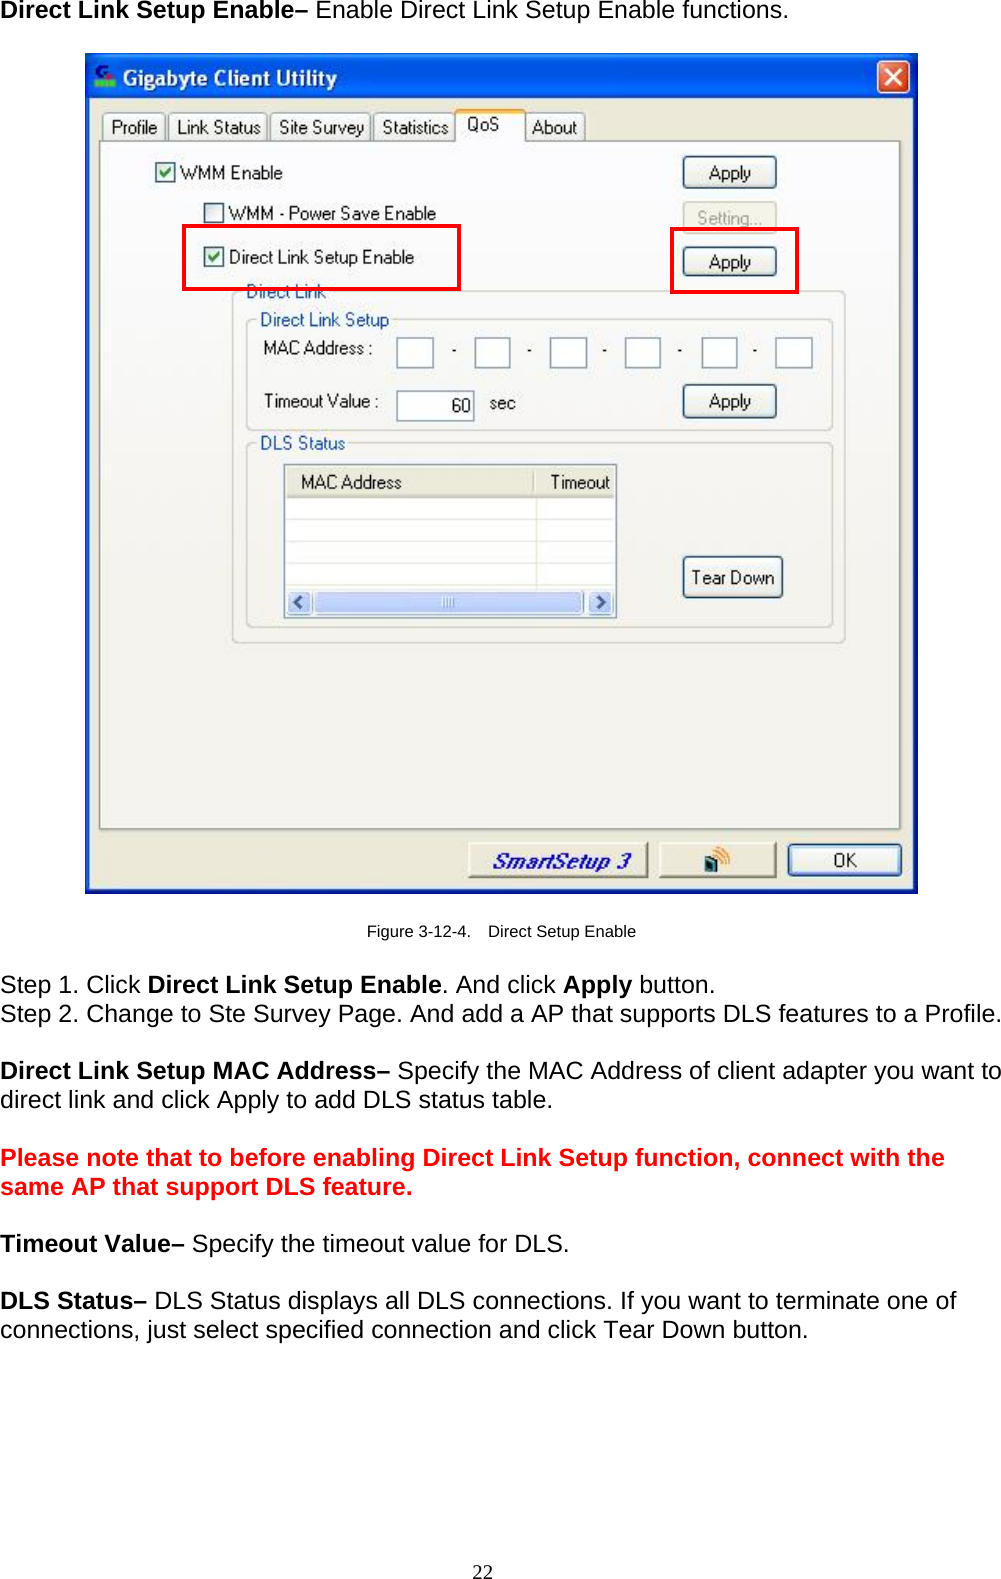 Direct Link Setup Enable– Enable Direct Link Setup Enable functions.    Figure 3-12-4.    Direct Setup Enable  Step 1. Click Direct Link Setup Enable. And click Apply button. Step 2. Change to Ste Survey Page. And add a AP that supports DLS features to a Profile.    Direct Link Setup MAC Address– Specify the MAC Address of client adapter you want to direct link and click Apply to add DLS status table.  Please note that to before enabling Direct Link Setup function, connect with the same AP that support DLS feature.  Timeout Value– Specify the timeout value for DLS.  DLS Status– DLS Status displays all DLS connections. If you want to terminate one of connections, just select specified connection and click Tear Down button.  22   